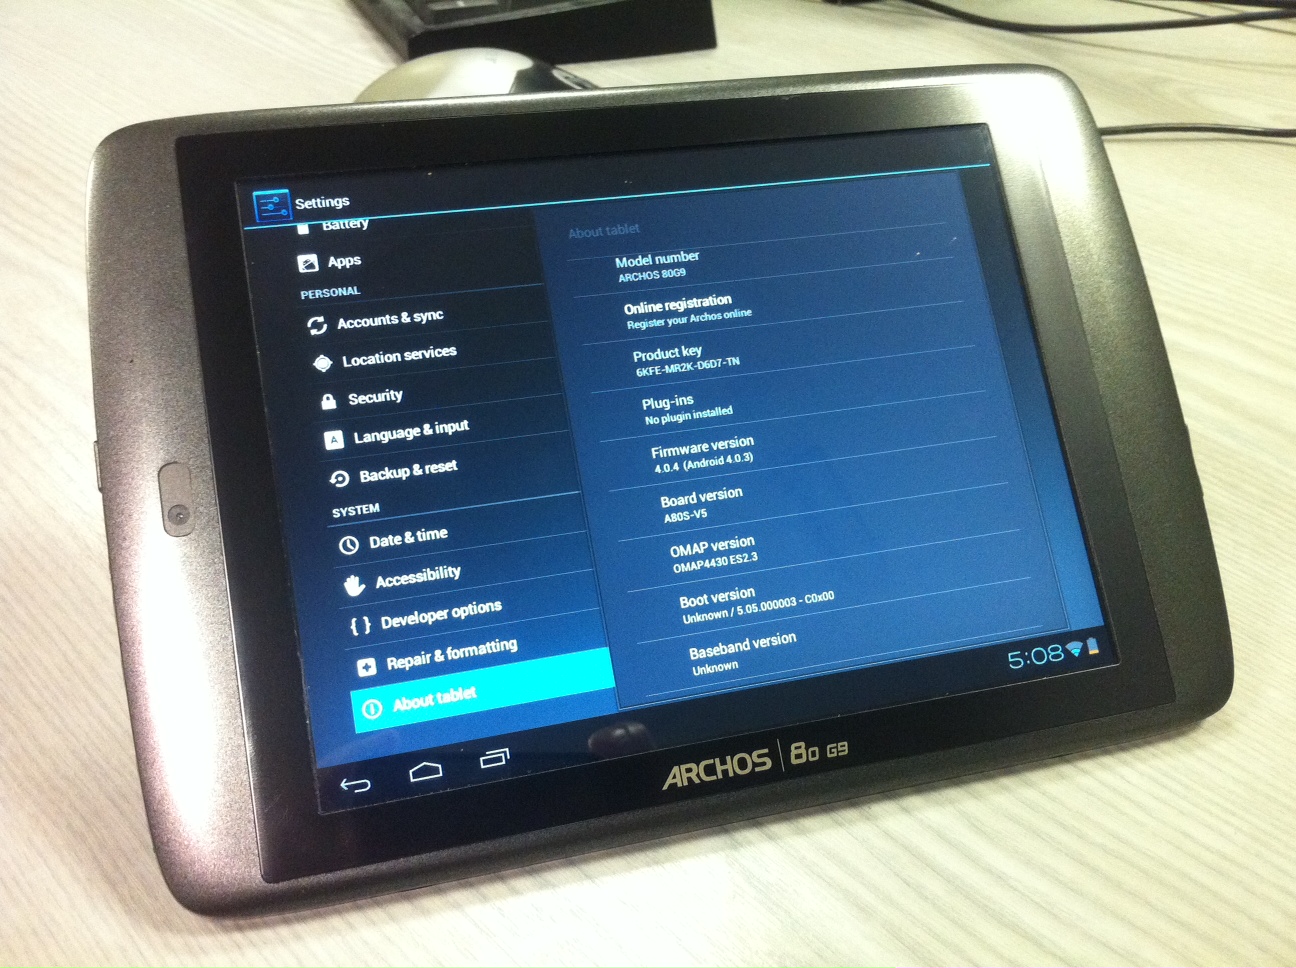 Ice Cream Sandwich Update for Archos G9 Tablets Rolling Out Now